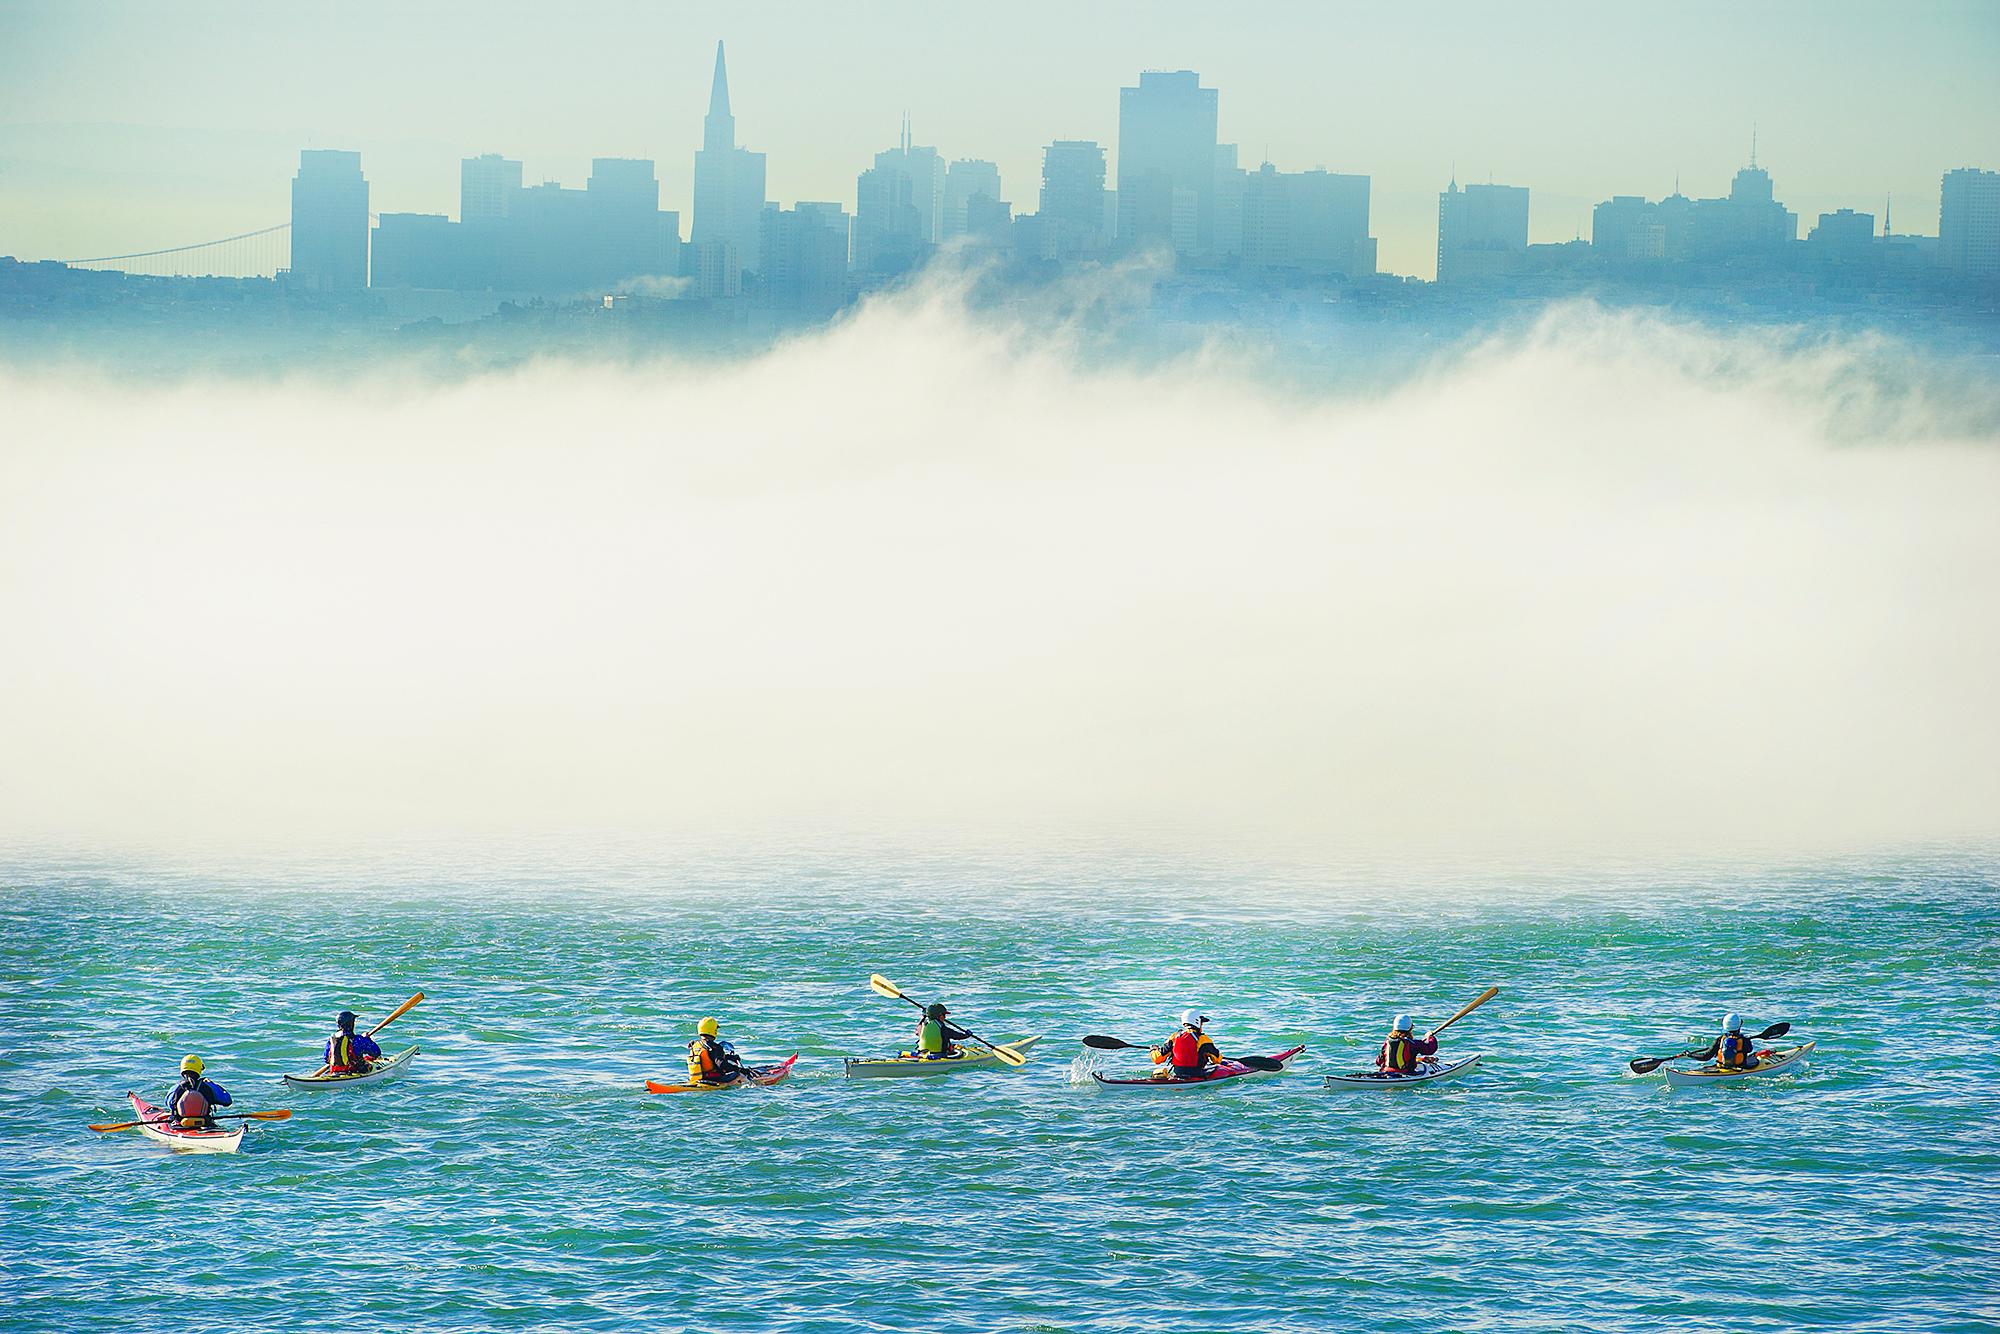 Mitchell Funk Landscape Photograph – Surreale Kayak-Party in Foggy Metaphysical San Francisco Bay mit gedämpfter Skyline